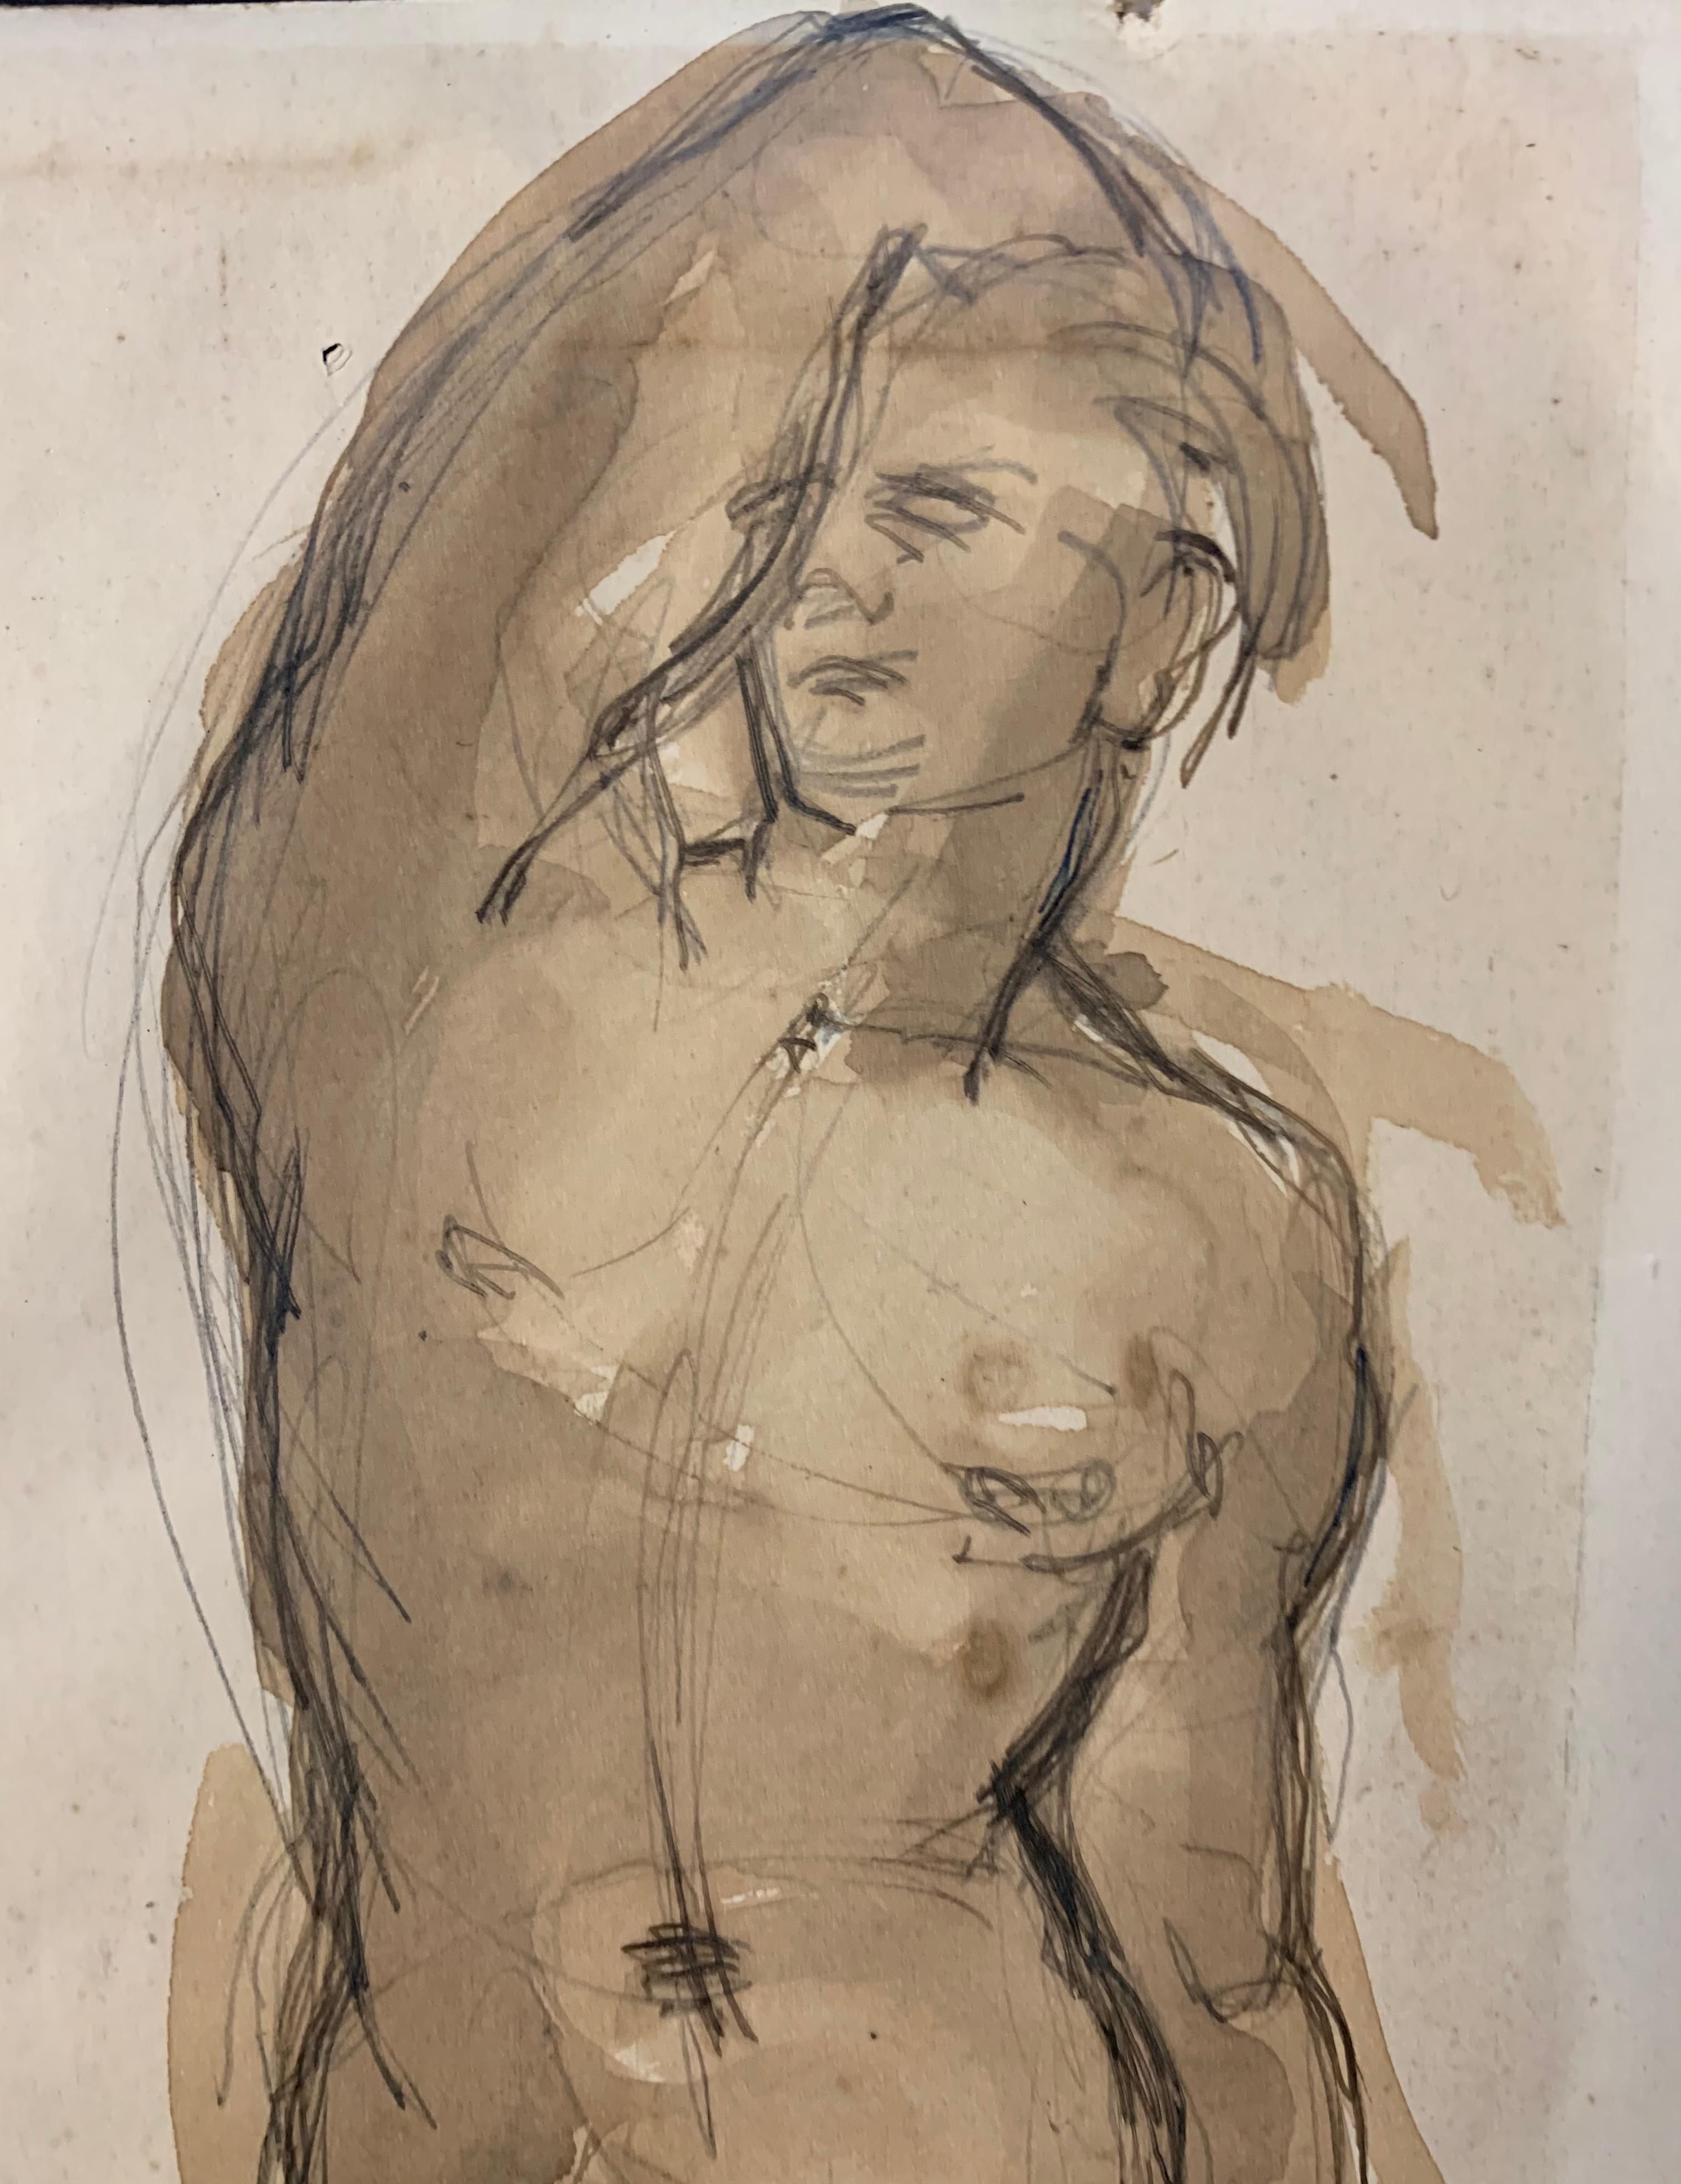 Male nude, male, Sepia, watercolor, 1943
Shipping free
Frame cm. 47 x 27 
No frame cm 15 x 36 